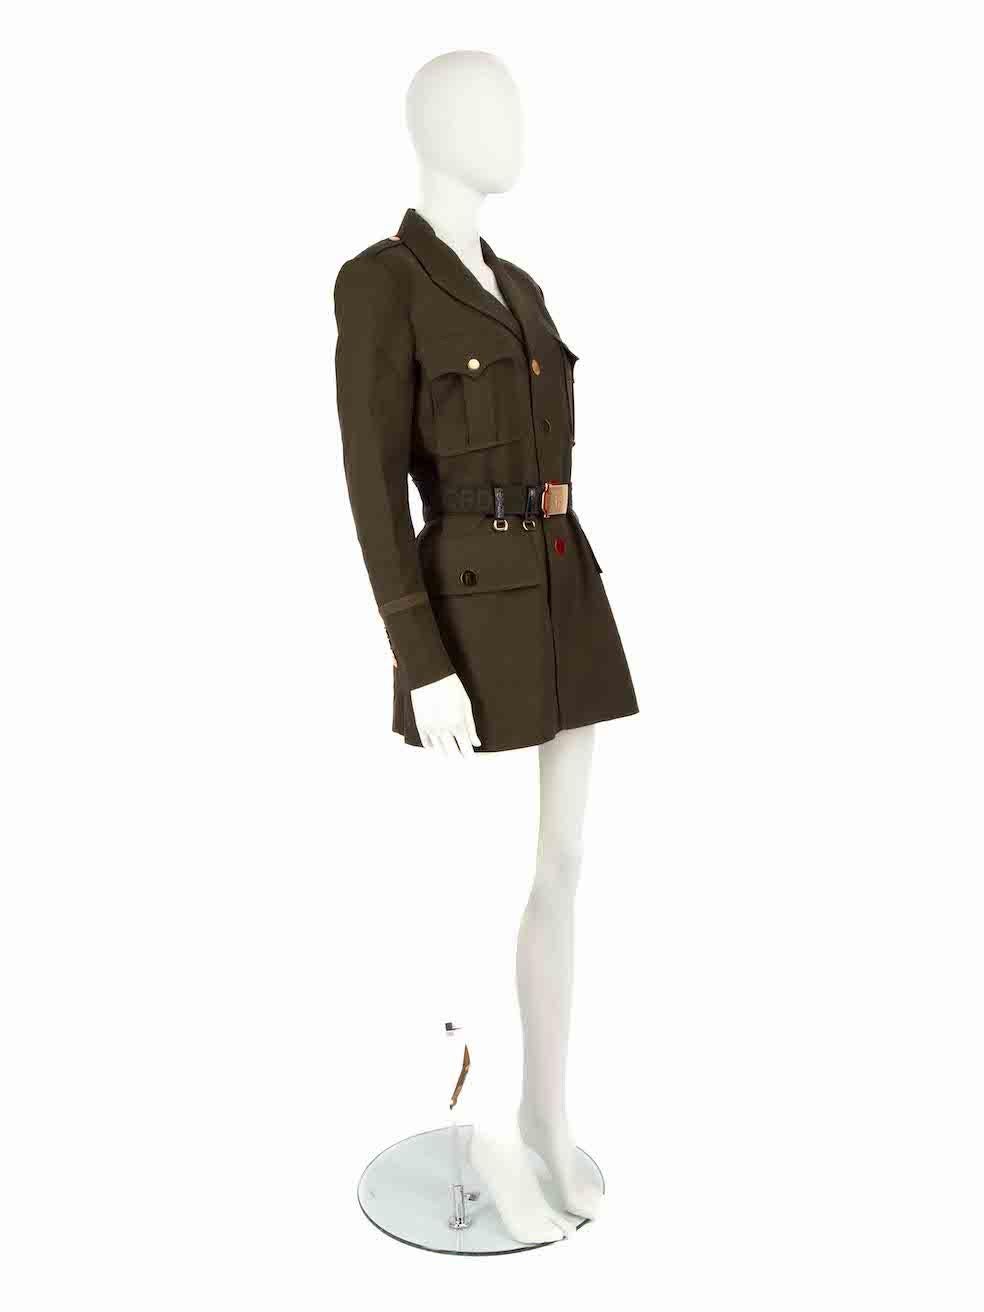 CONDITION is Never worn. No visible wear to coat is evident on this new Tom Ford designer resale item.
 
Details
Khaki
Wool
Military style coat
Mid length
Single breasted
4x Front buttoned flap pockets
Buttoned cuffs
Logo branded belt
2x Internal